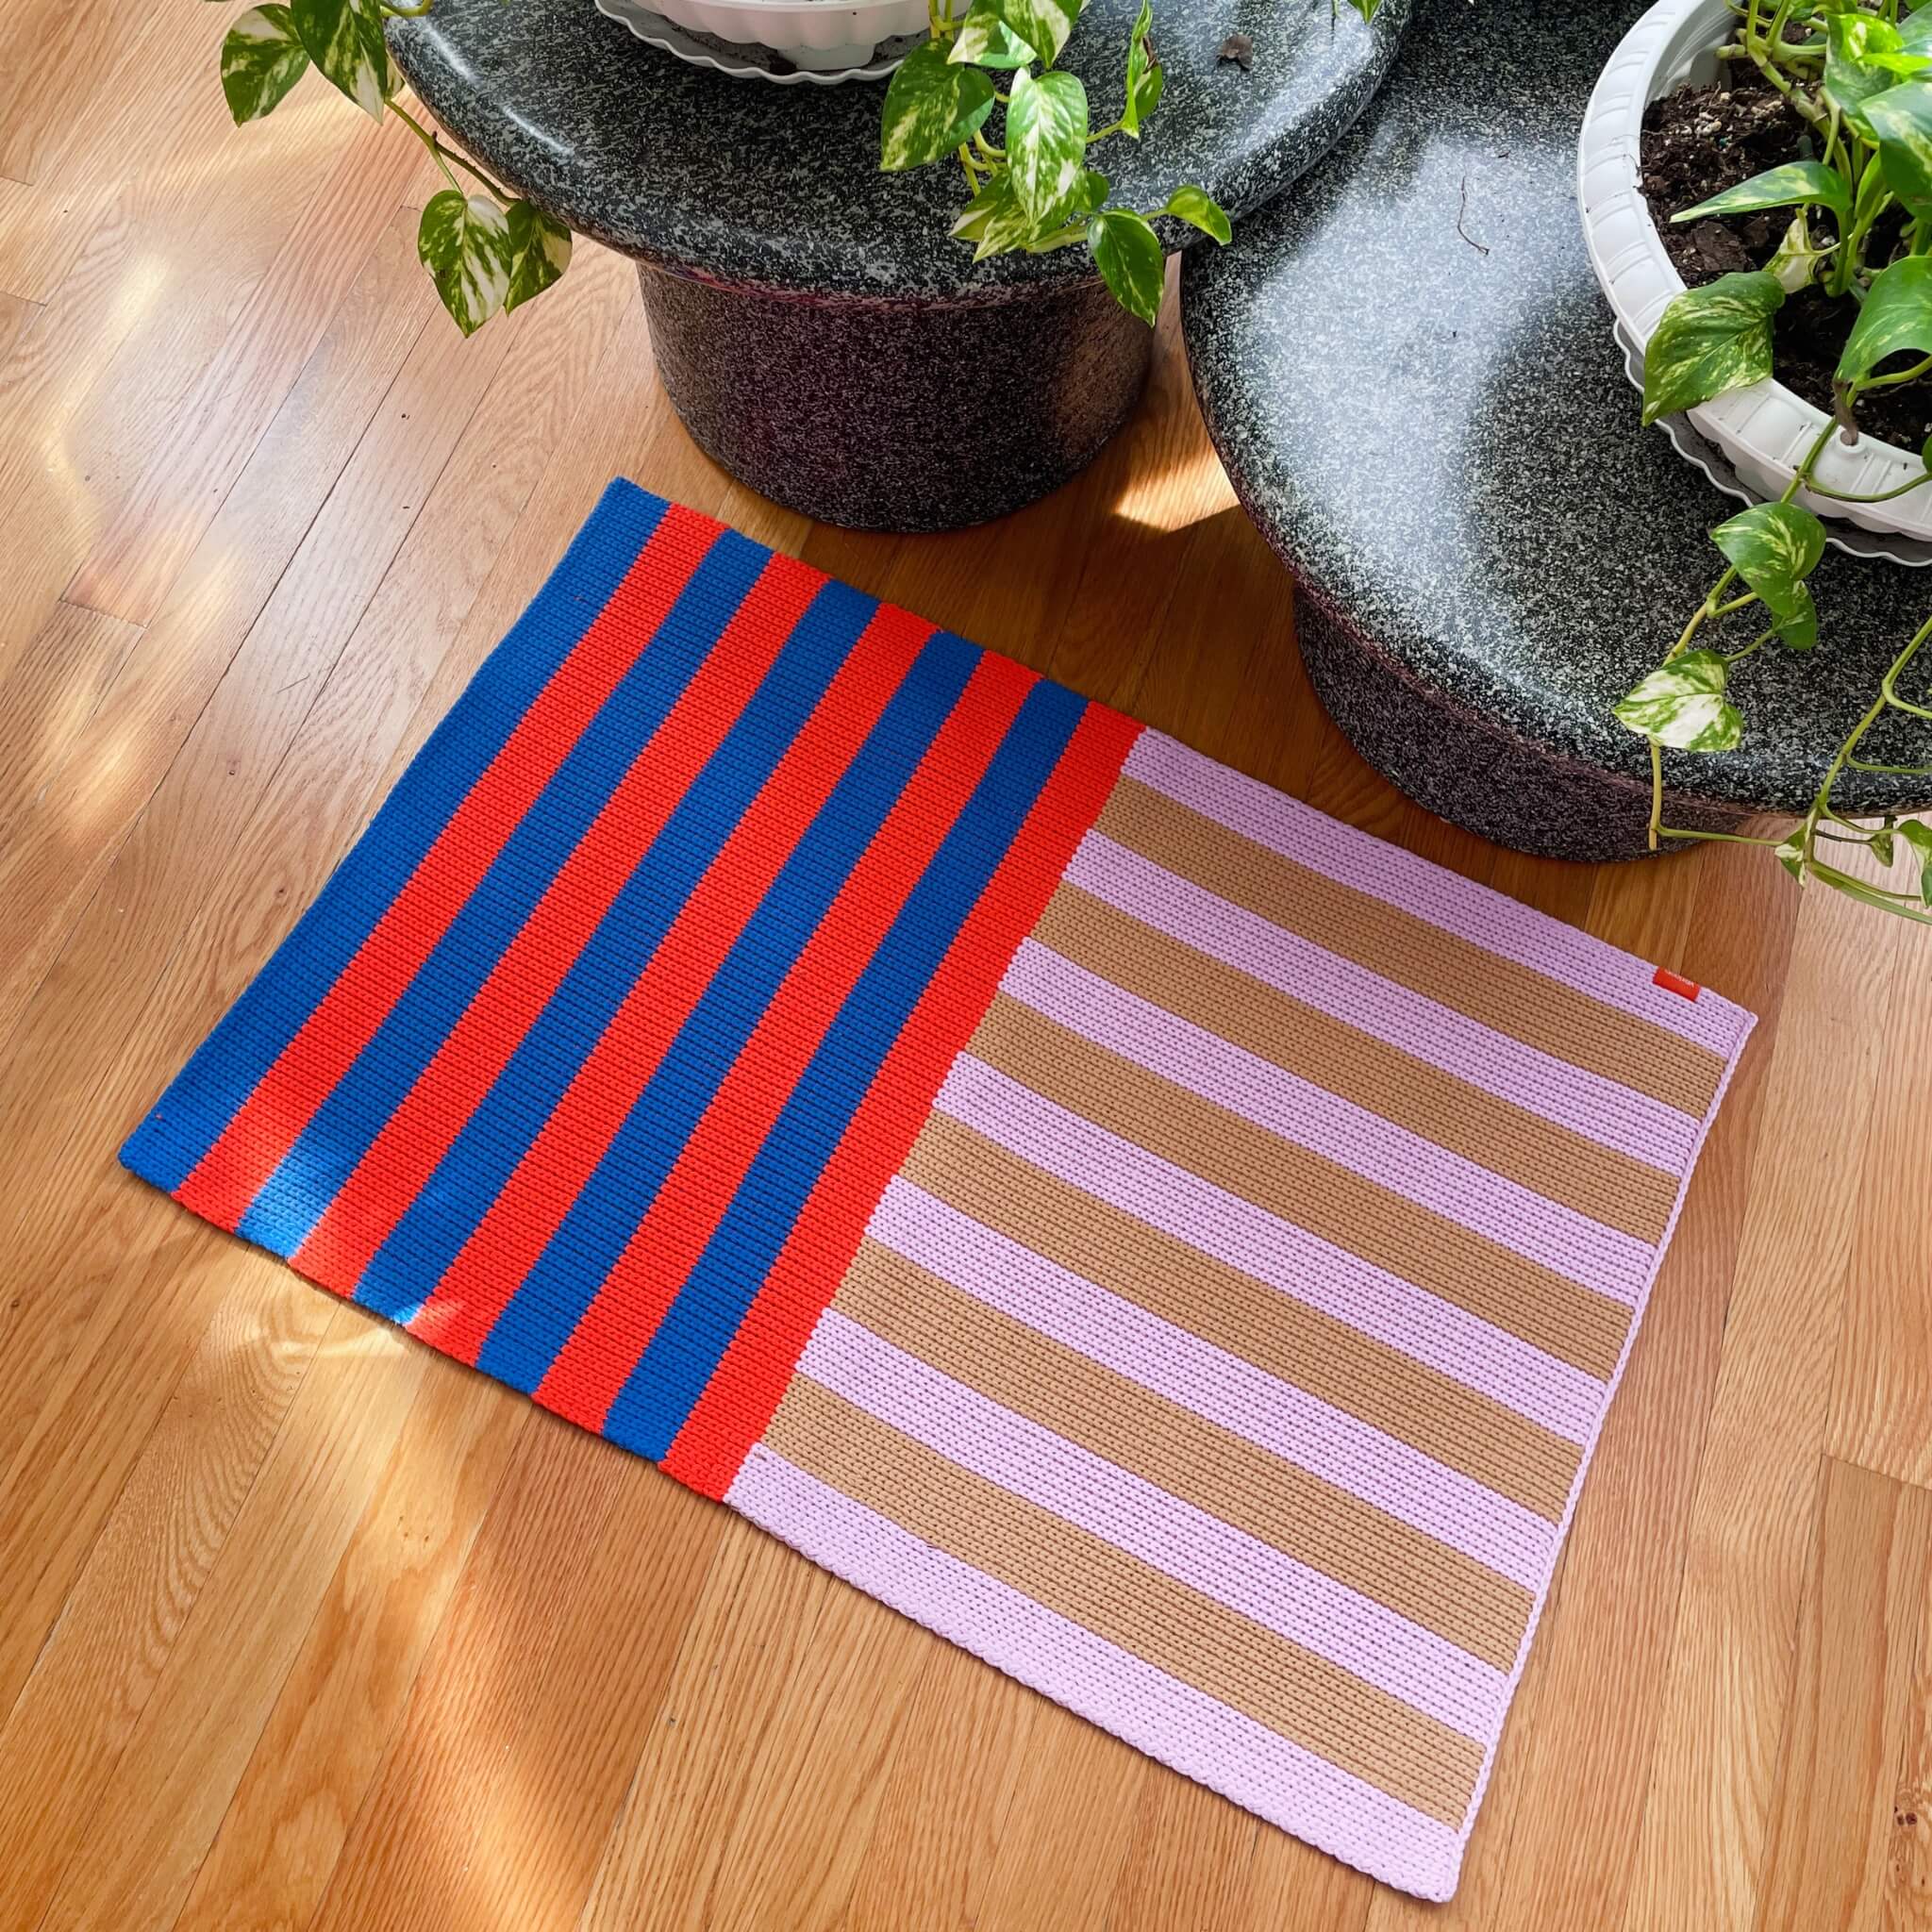 I Tried One of Verloop's Mini Rug and Instantly Elevated My